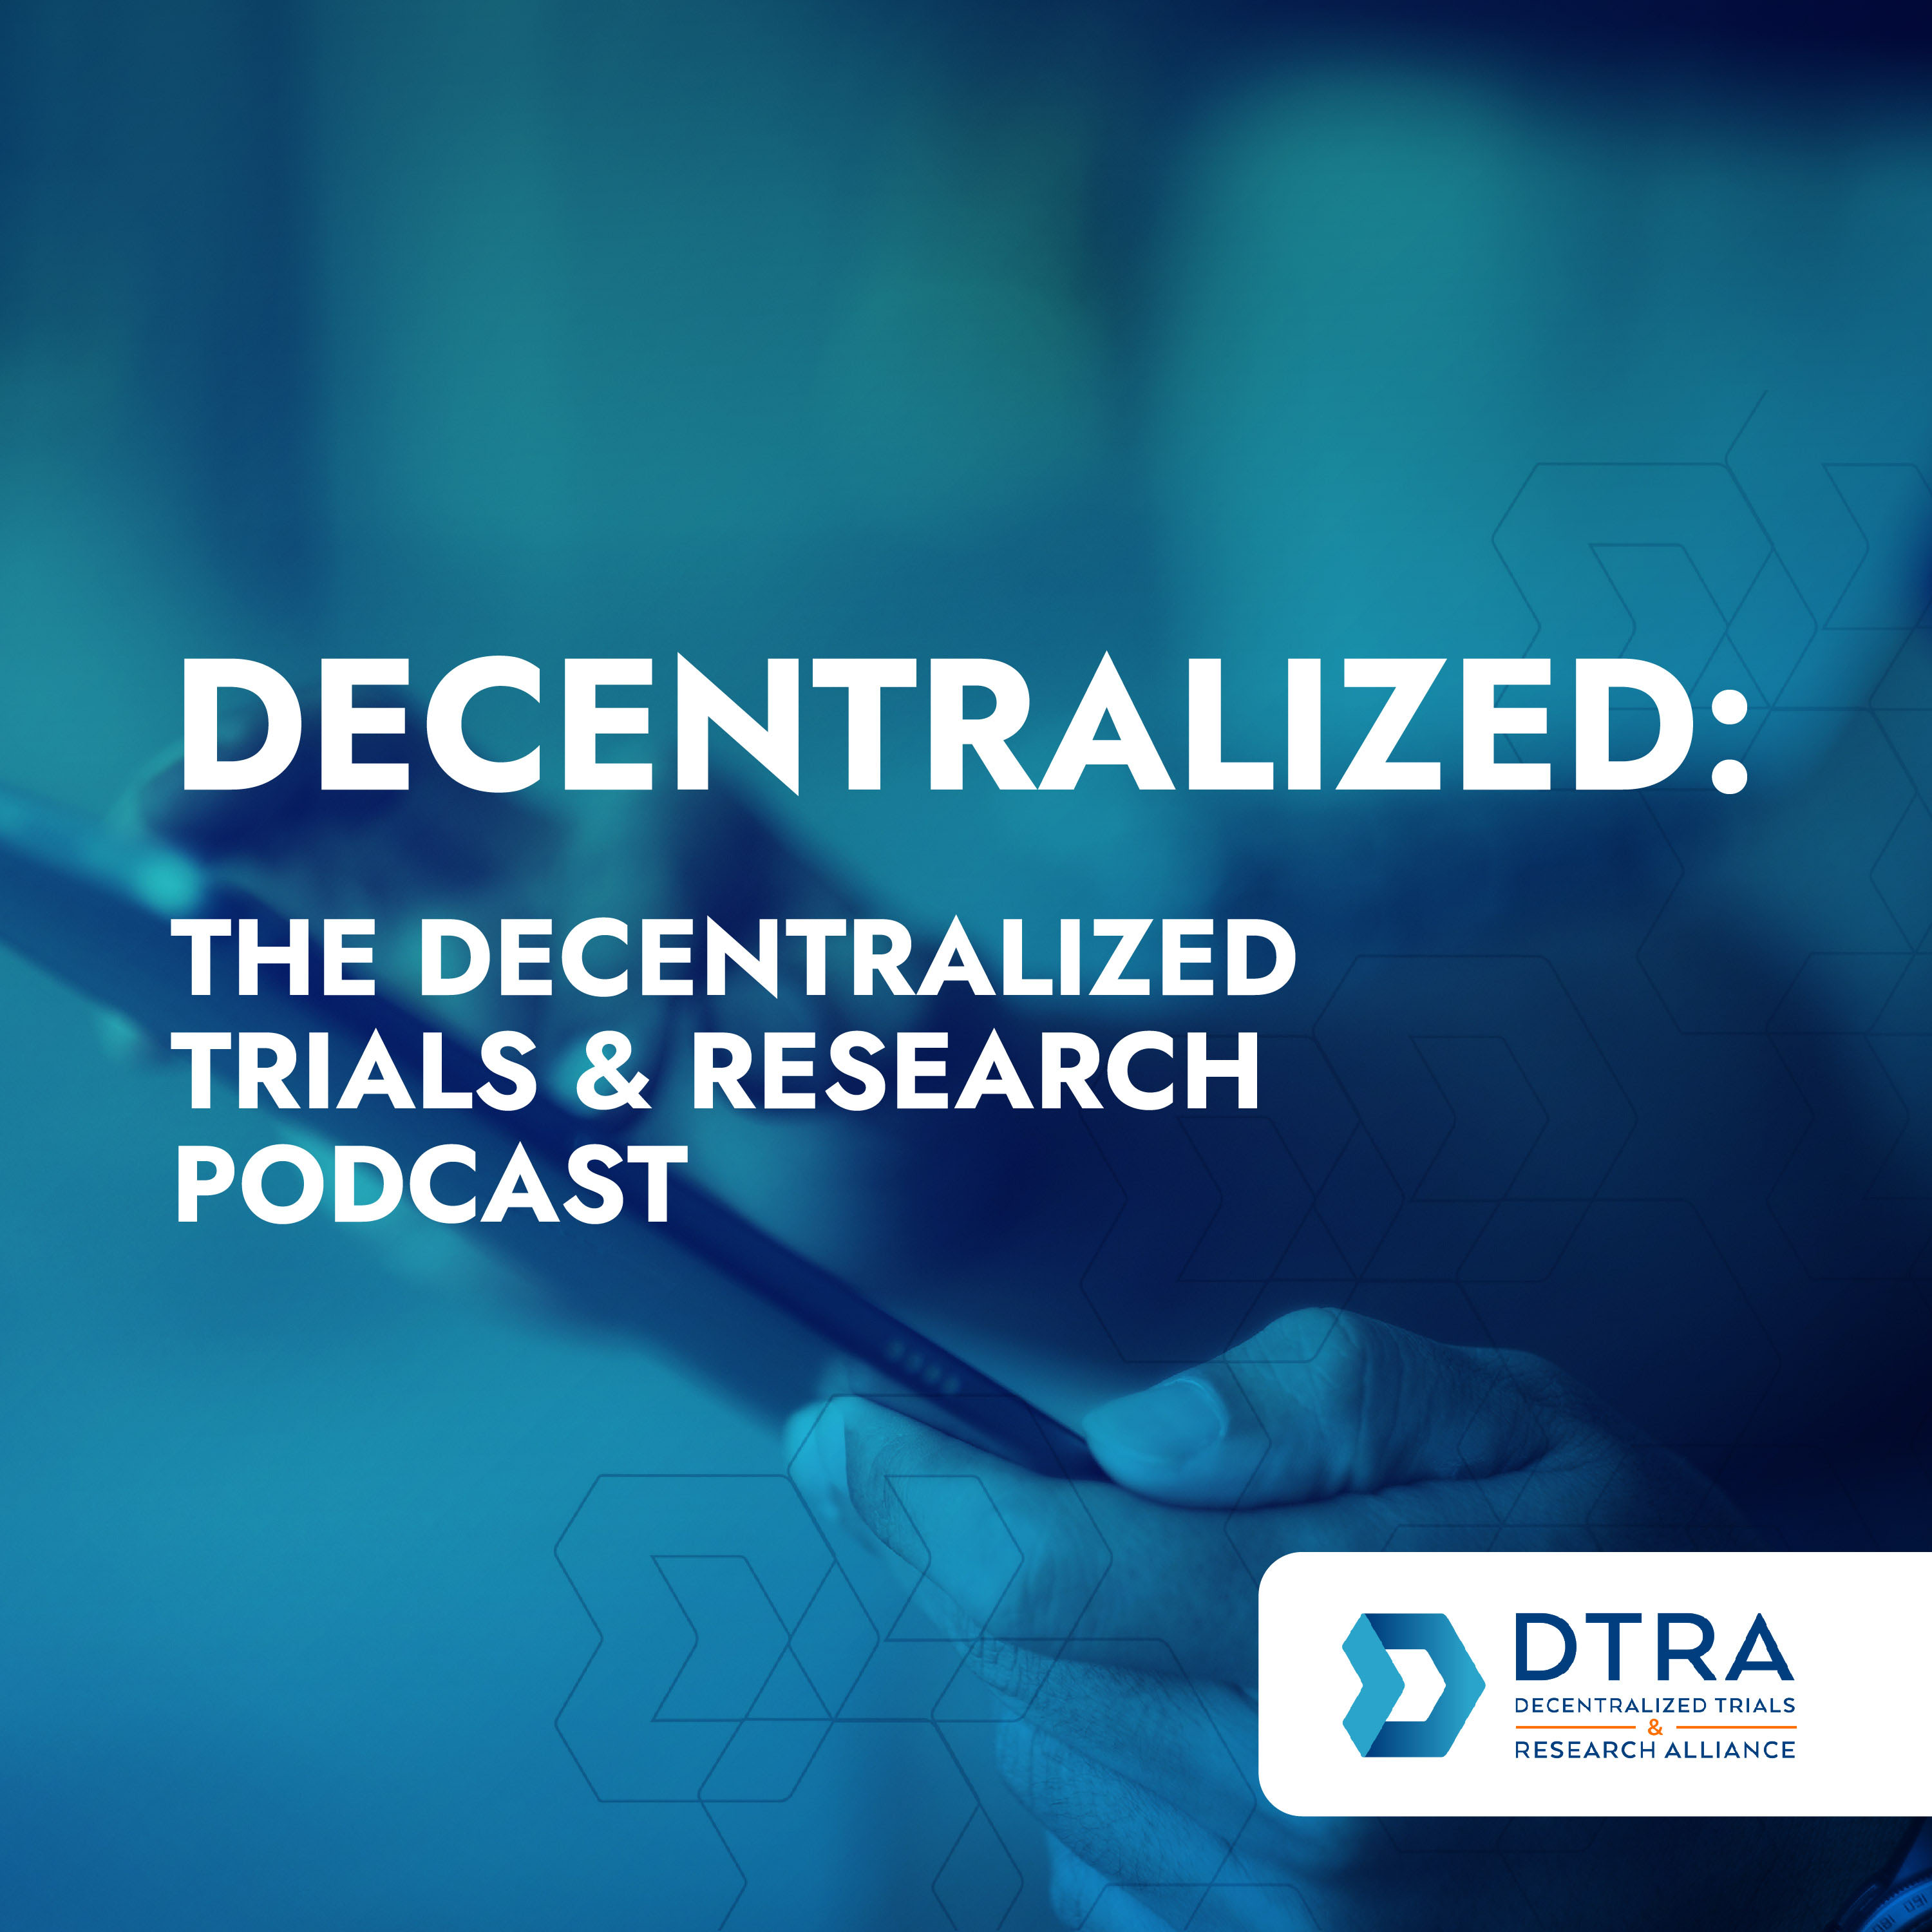 Kids and Decentralized Trials